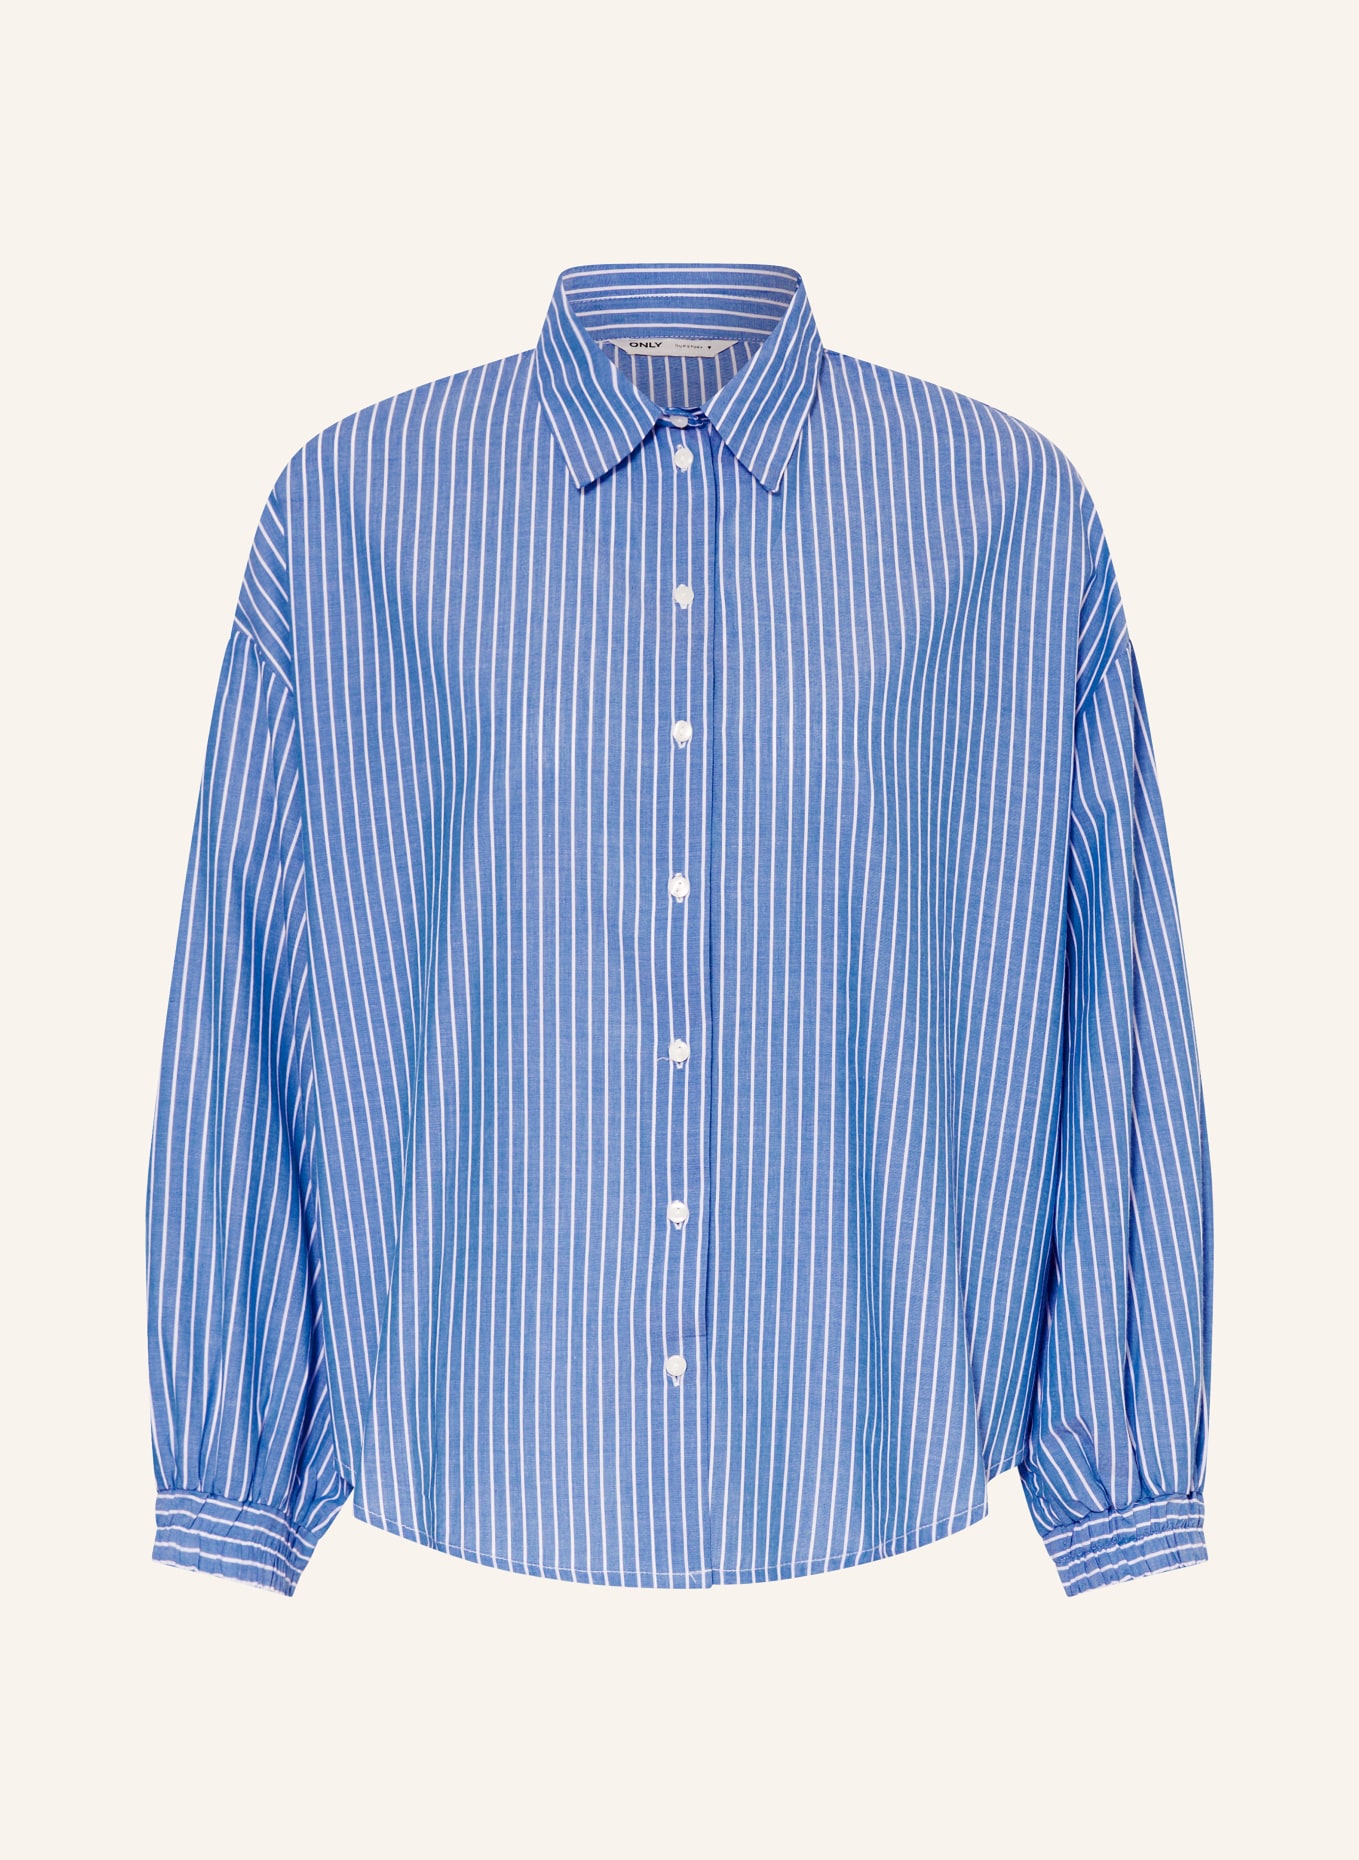 ONLY Shirt blouse, Color: BLUE/ WHITE (Image 1)